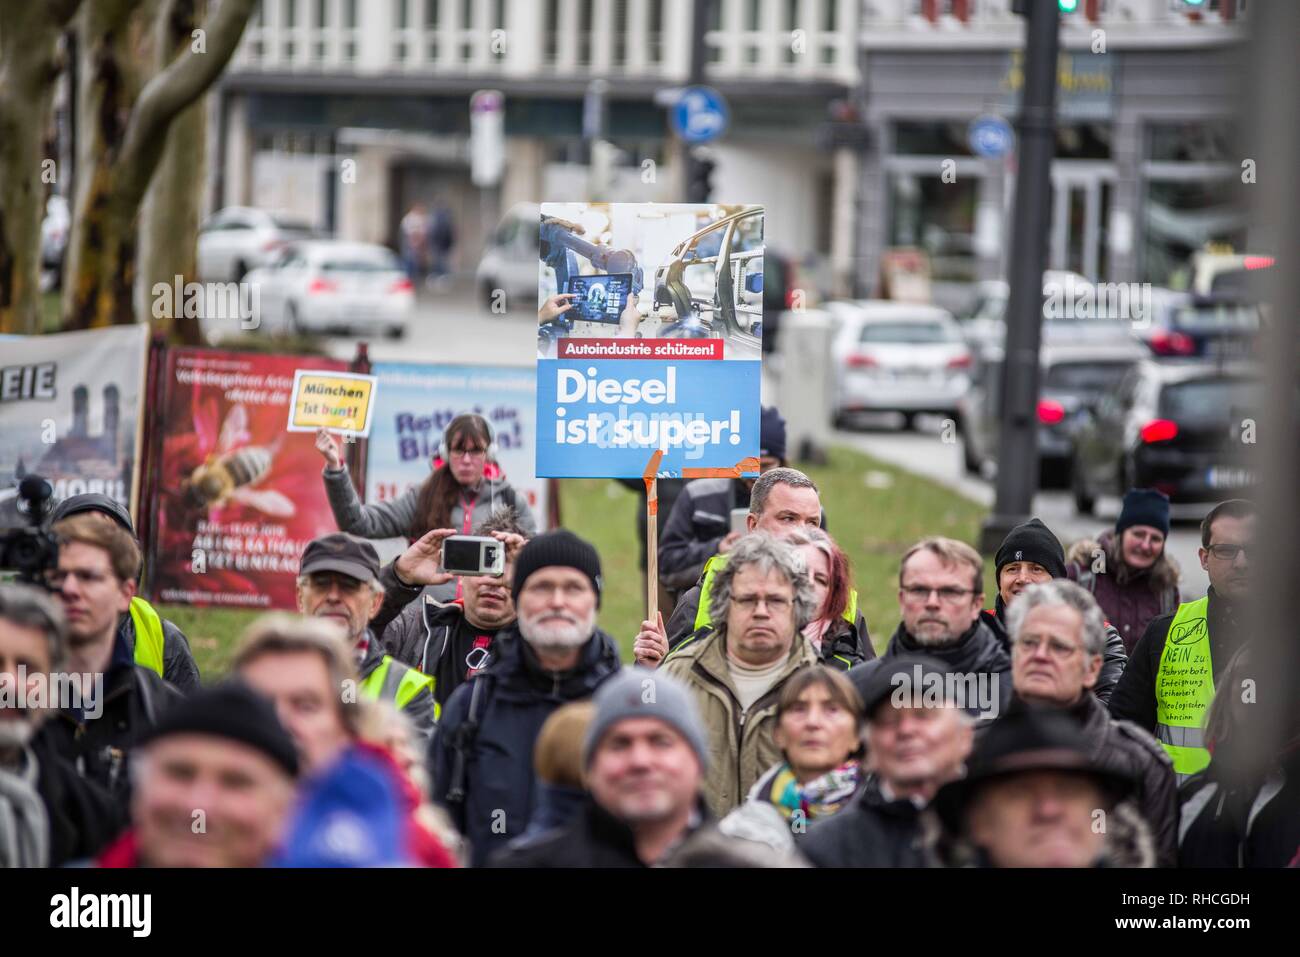 Munich, Bavaria, Germany. 2nd Feb, 2019. A poorly hidden sign from the far-right Alternative for Germany party was displayed at the demonstration. Responding to the prospect of diesel auto bans in major cities in Germany, protestors assembled at an air quality monitoring station in Munich's city center. Credit: ZUMA Press, Inc./Alamy Live News Stock Photo